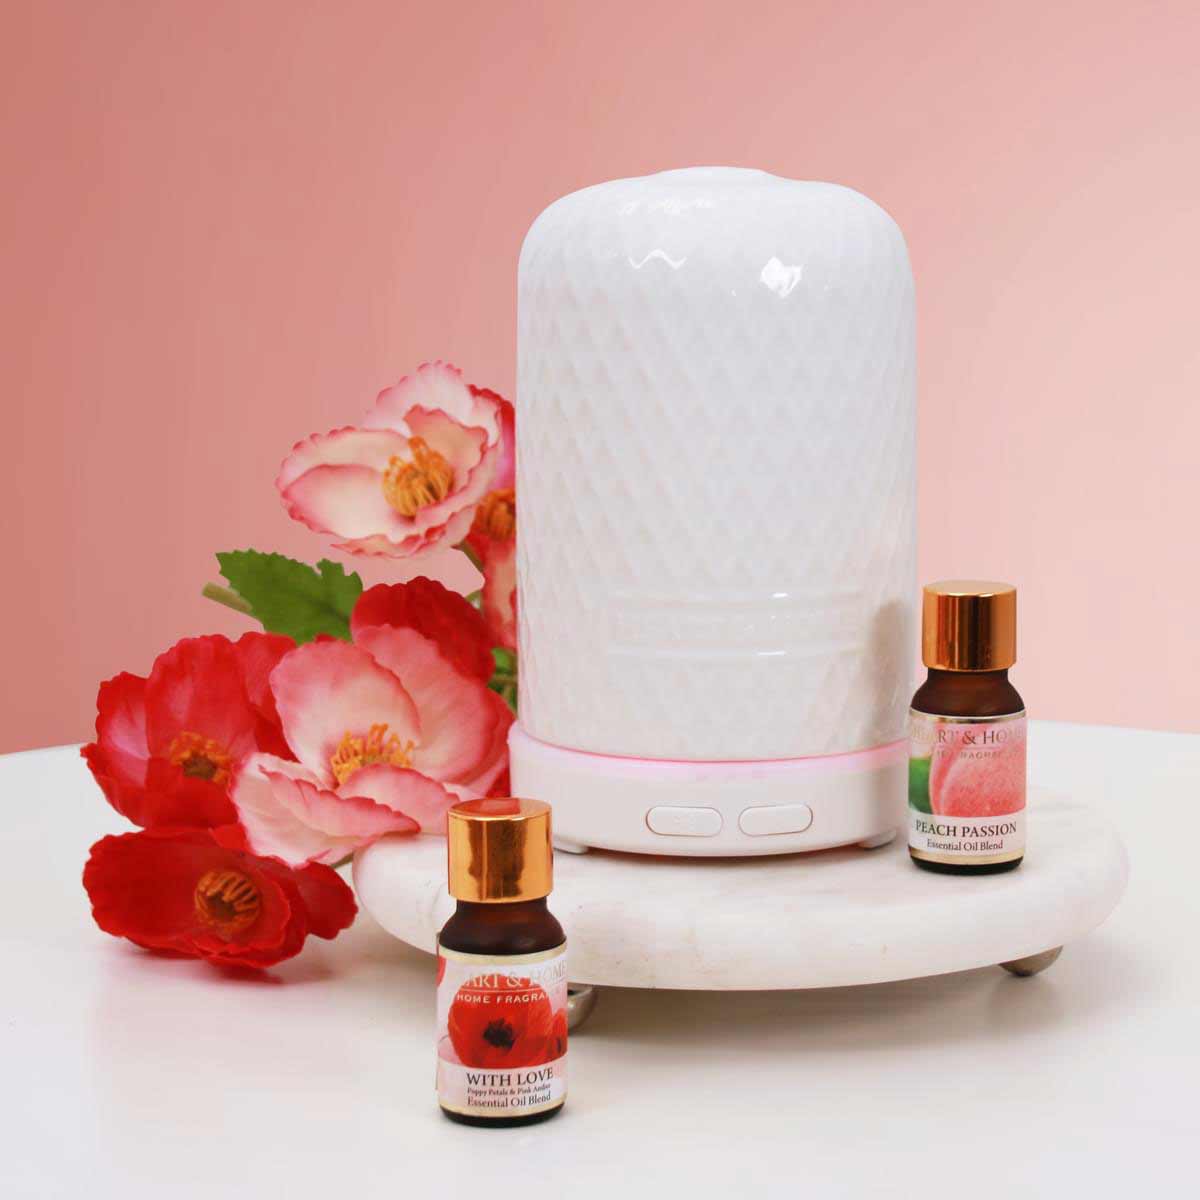 Heart and Home Ultrasonic Aroma Diffuser